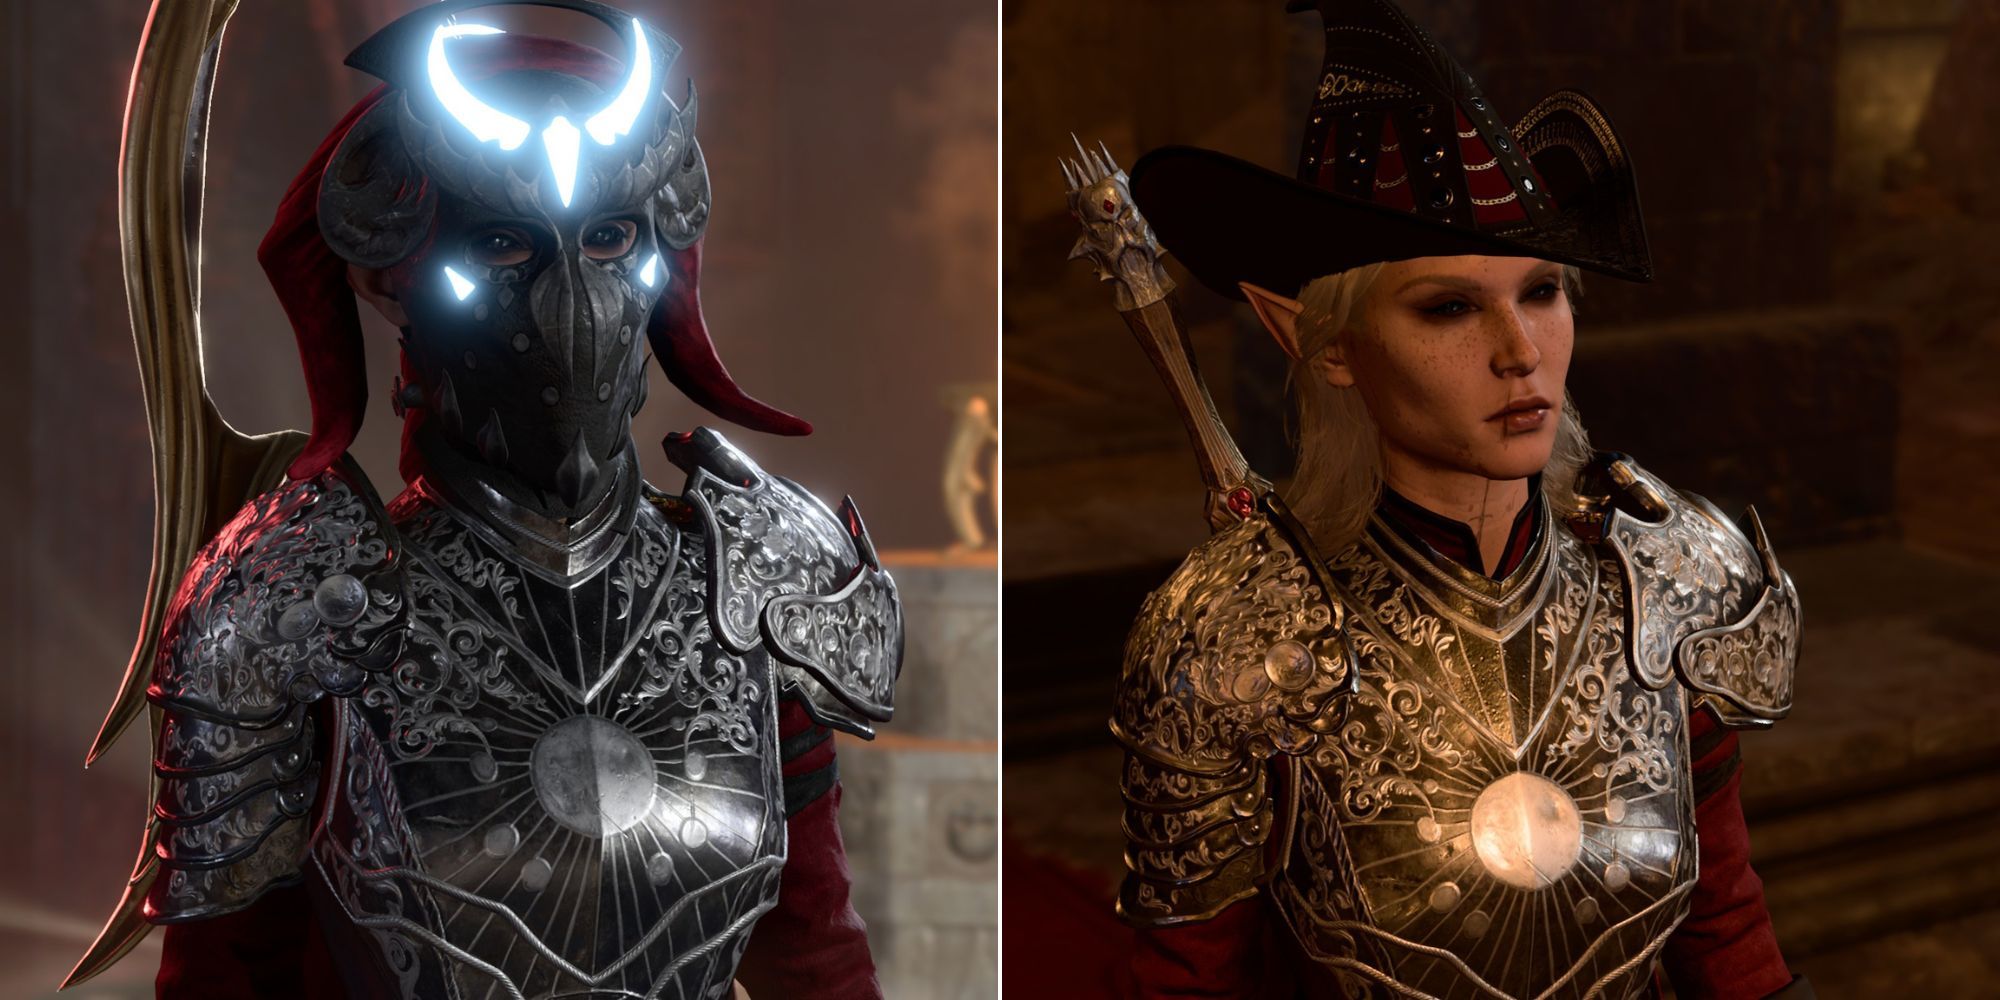 Baldur's Gate 3 split image of player wearing the Mask of Soul Perception and another player wearing Birthright